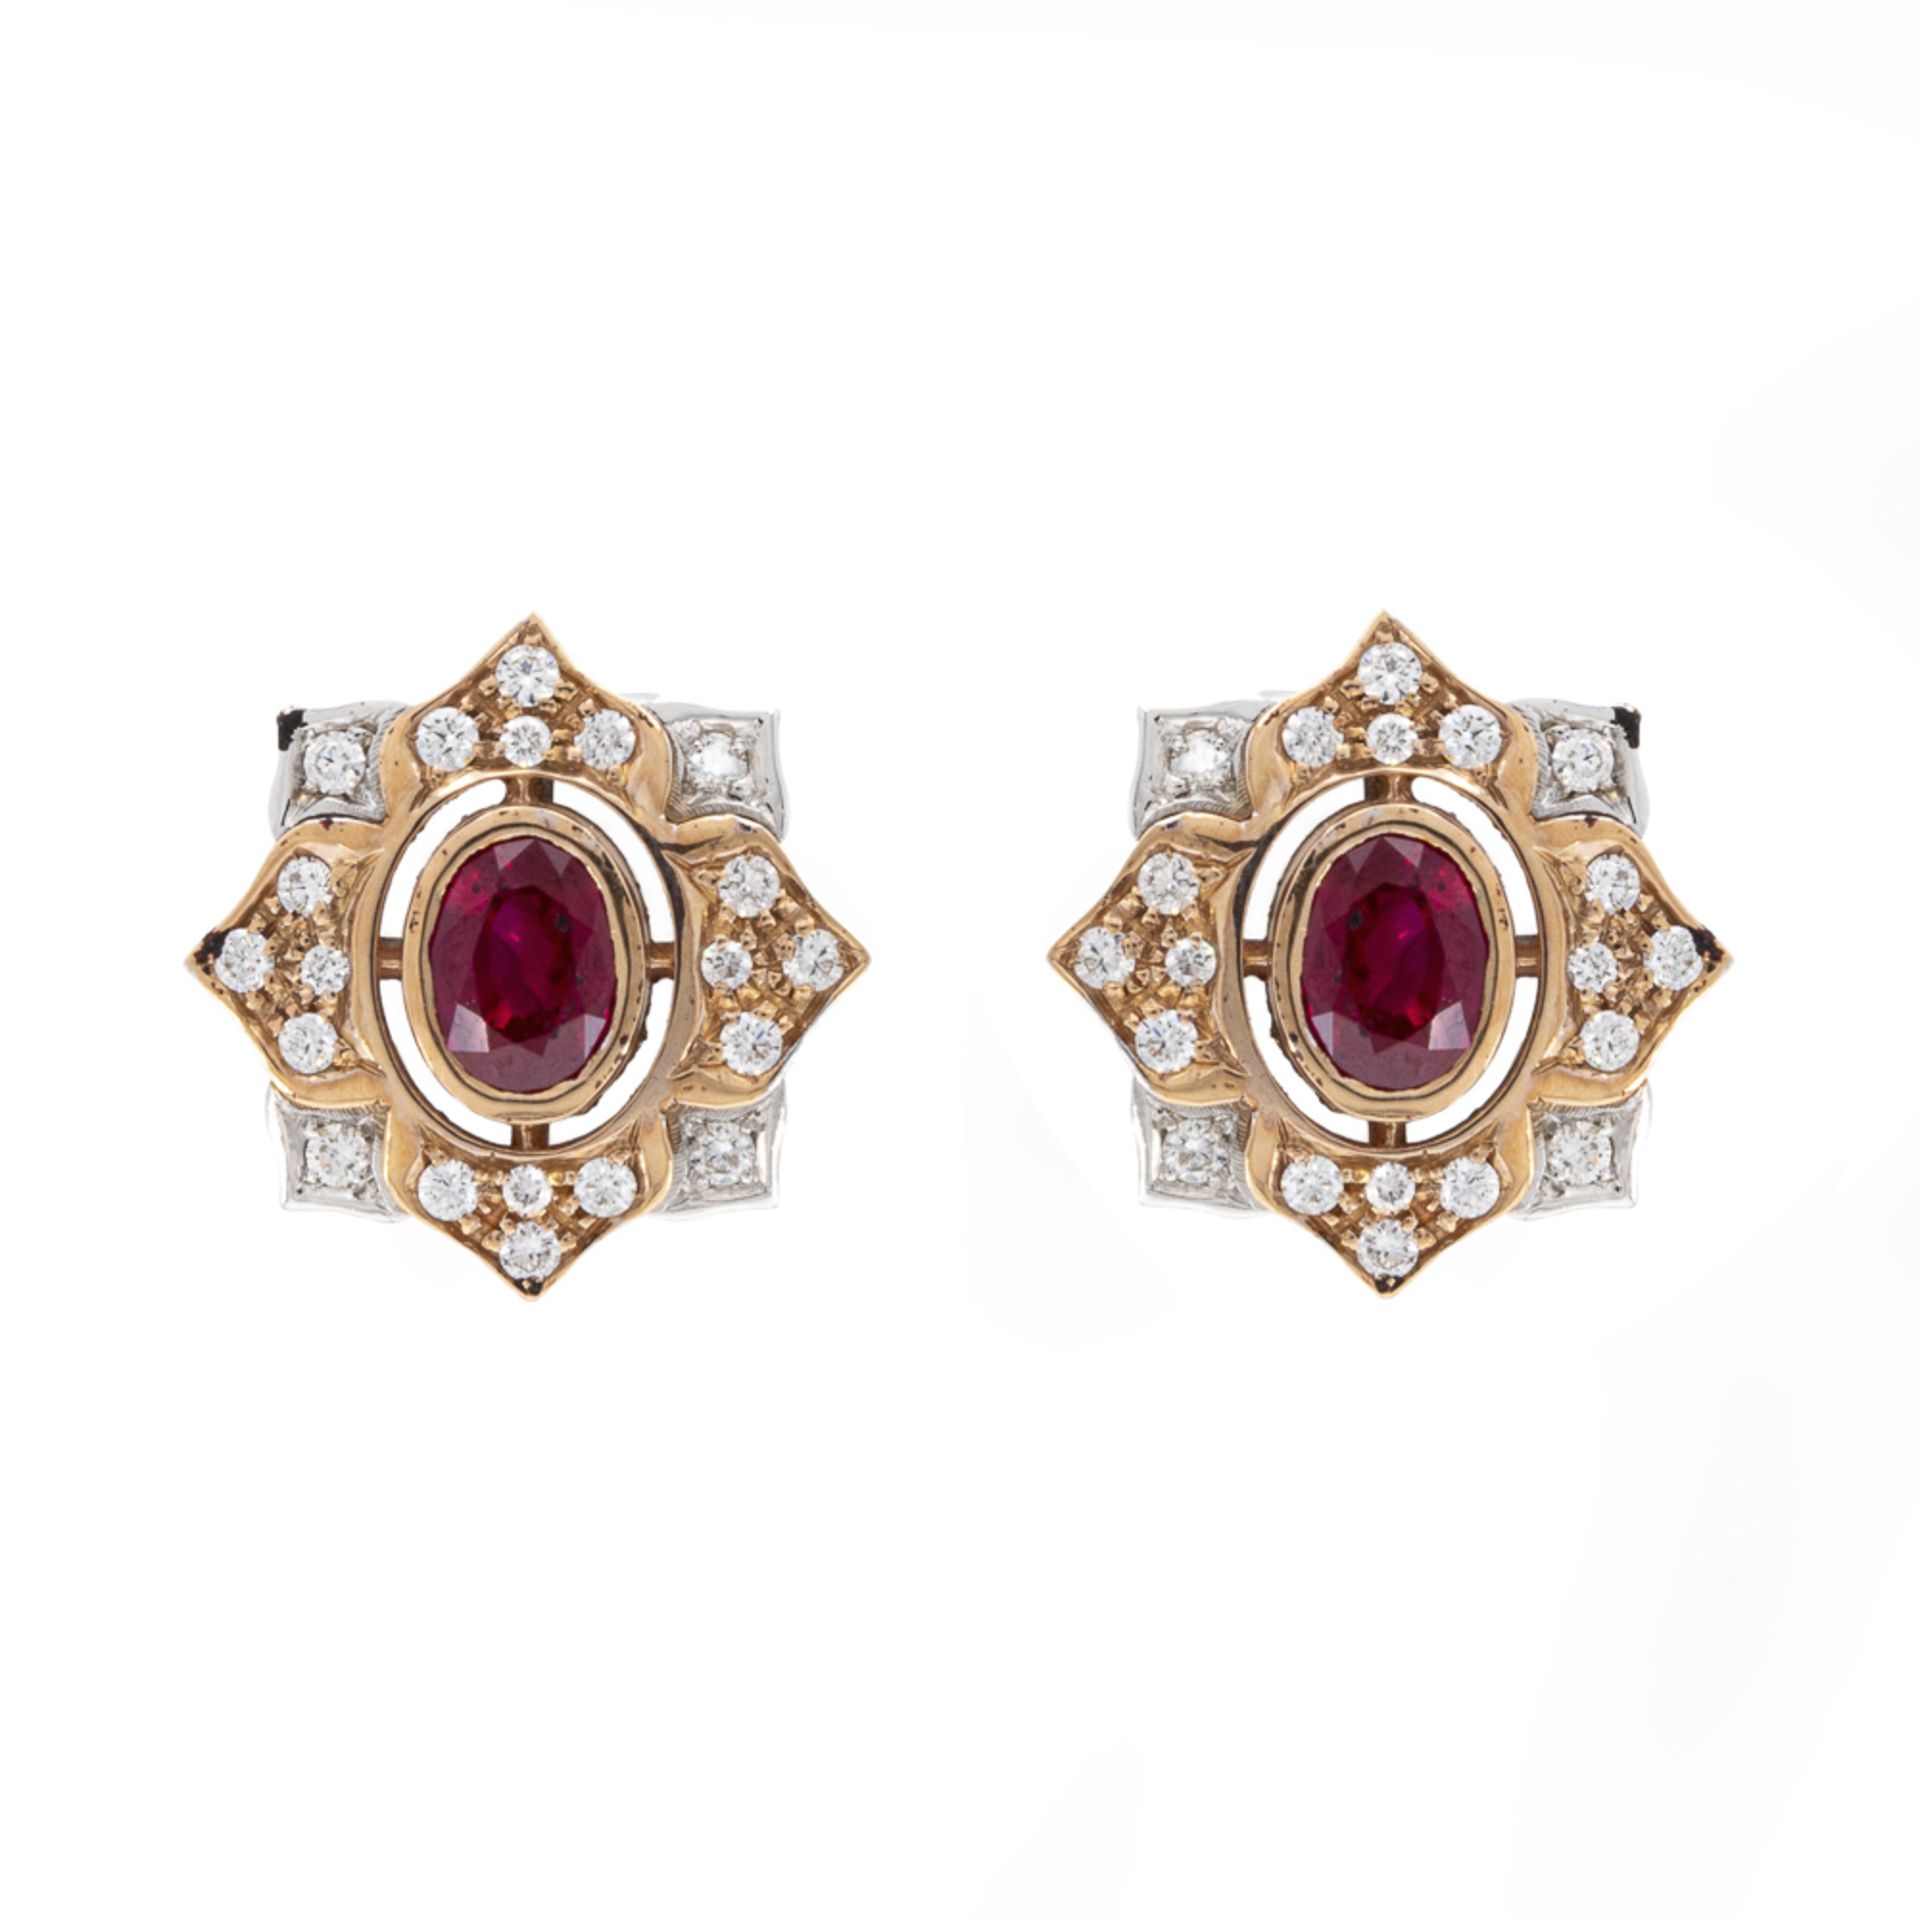 18kt two-color gold lobe earrings with natural Burmese rubies